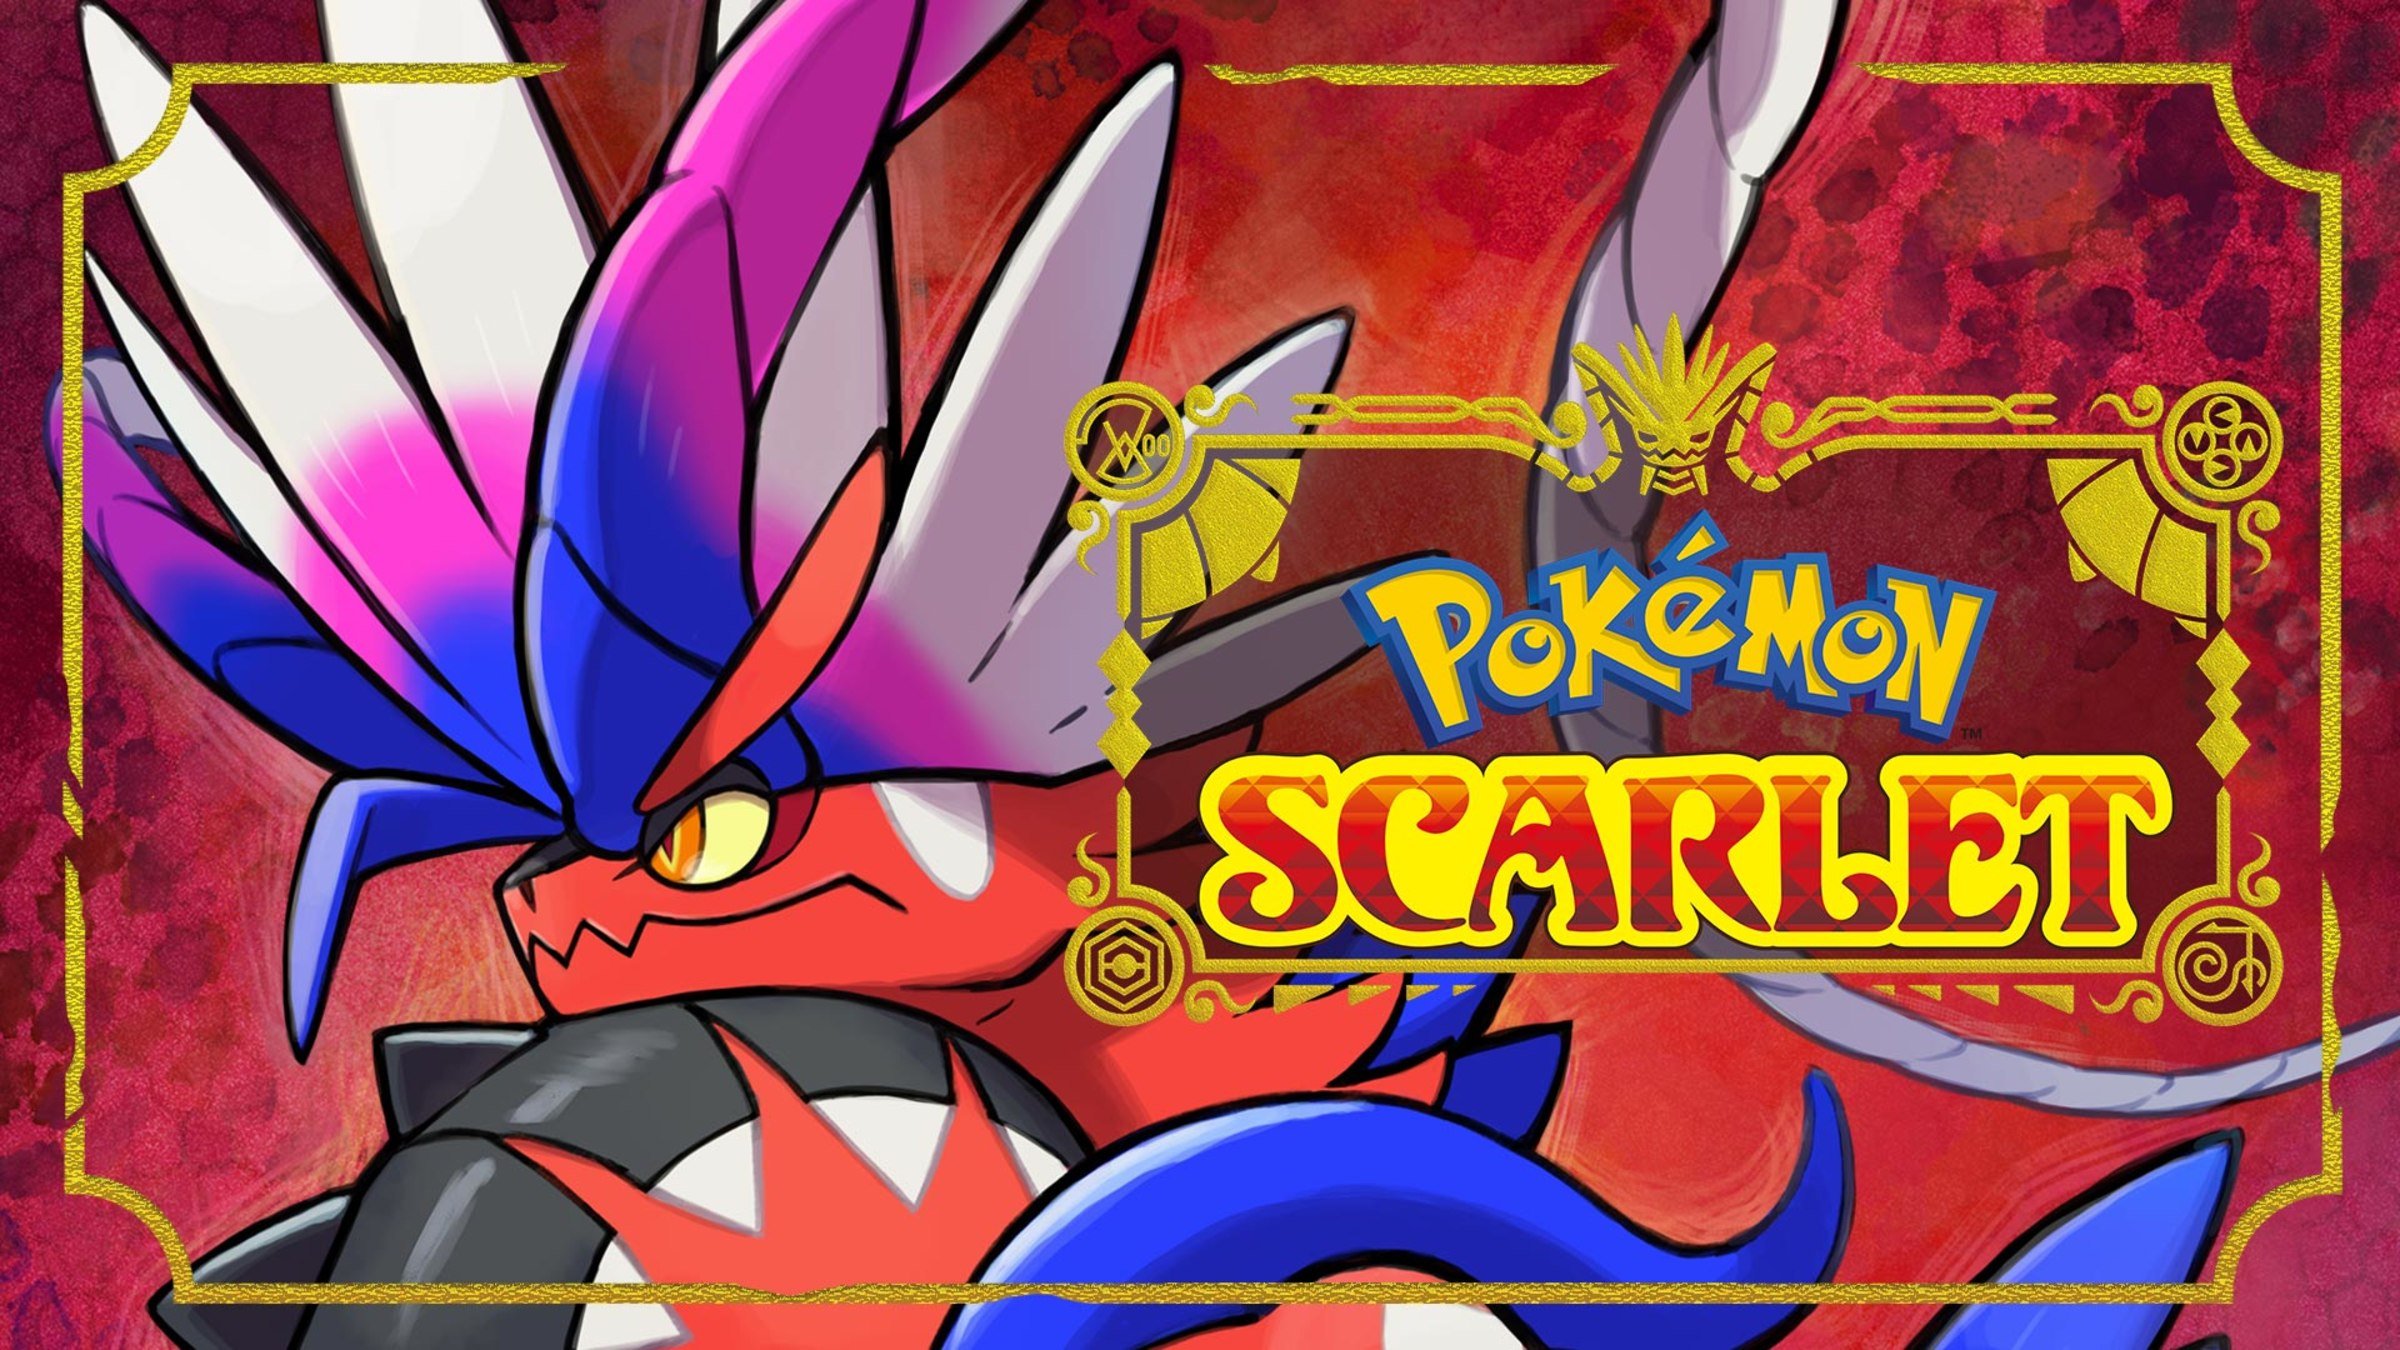 How to Cheat and Duplicate Pokémon in 'Scarlet' and 'Violet